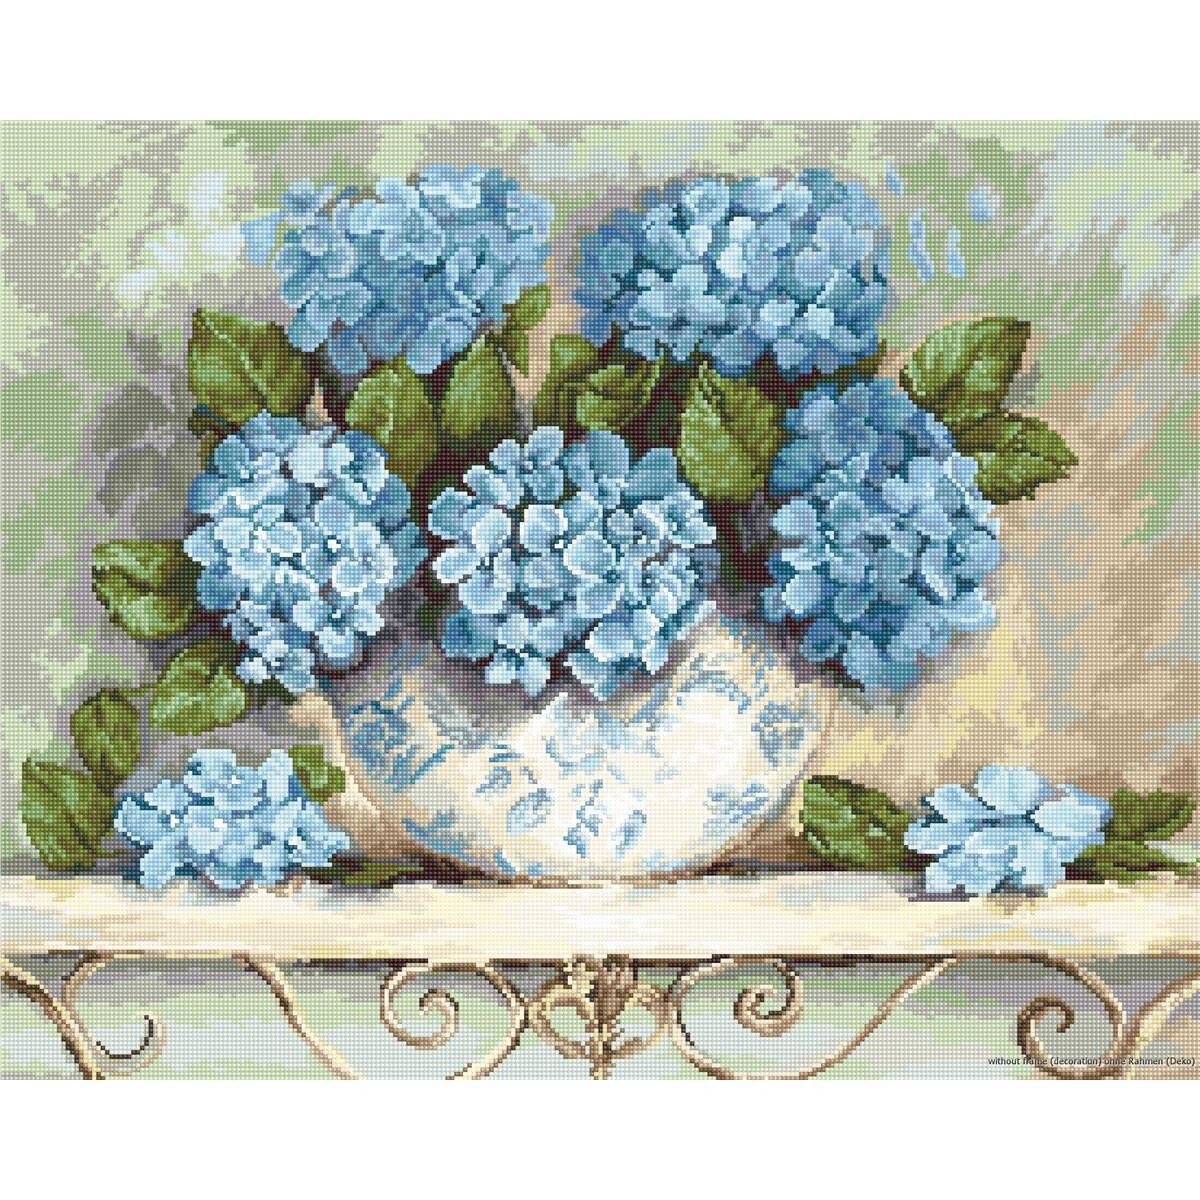 Painting of a white vase with blue floral patterns...